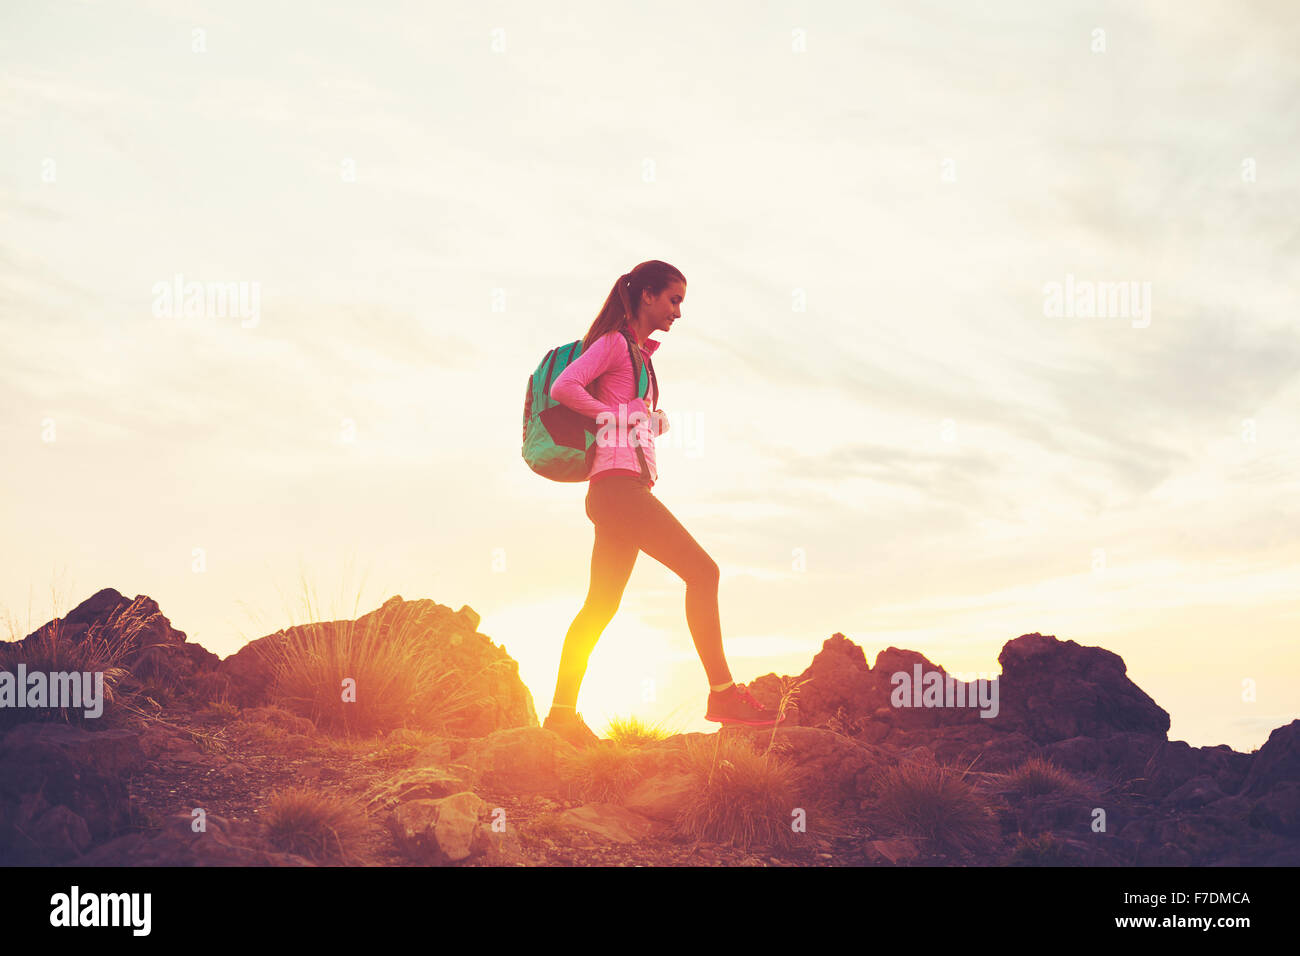 Woman Hiking in the Mountains at Sunset, Adventure Outdoor Active Lifestyle Stock Photo